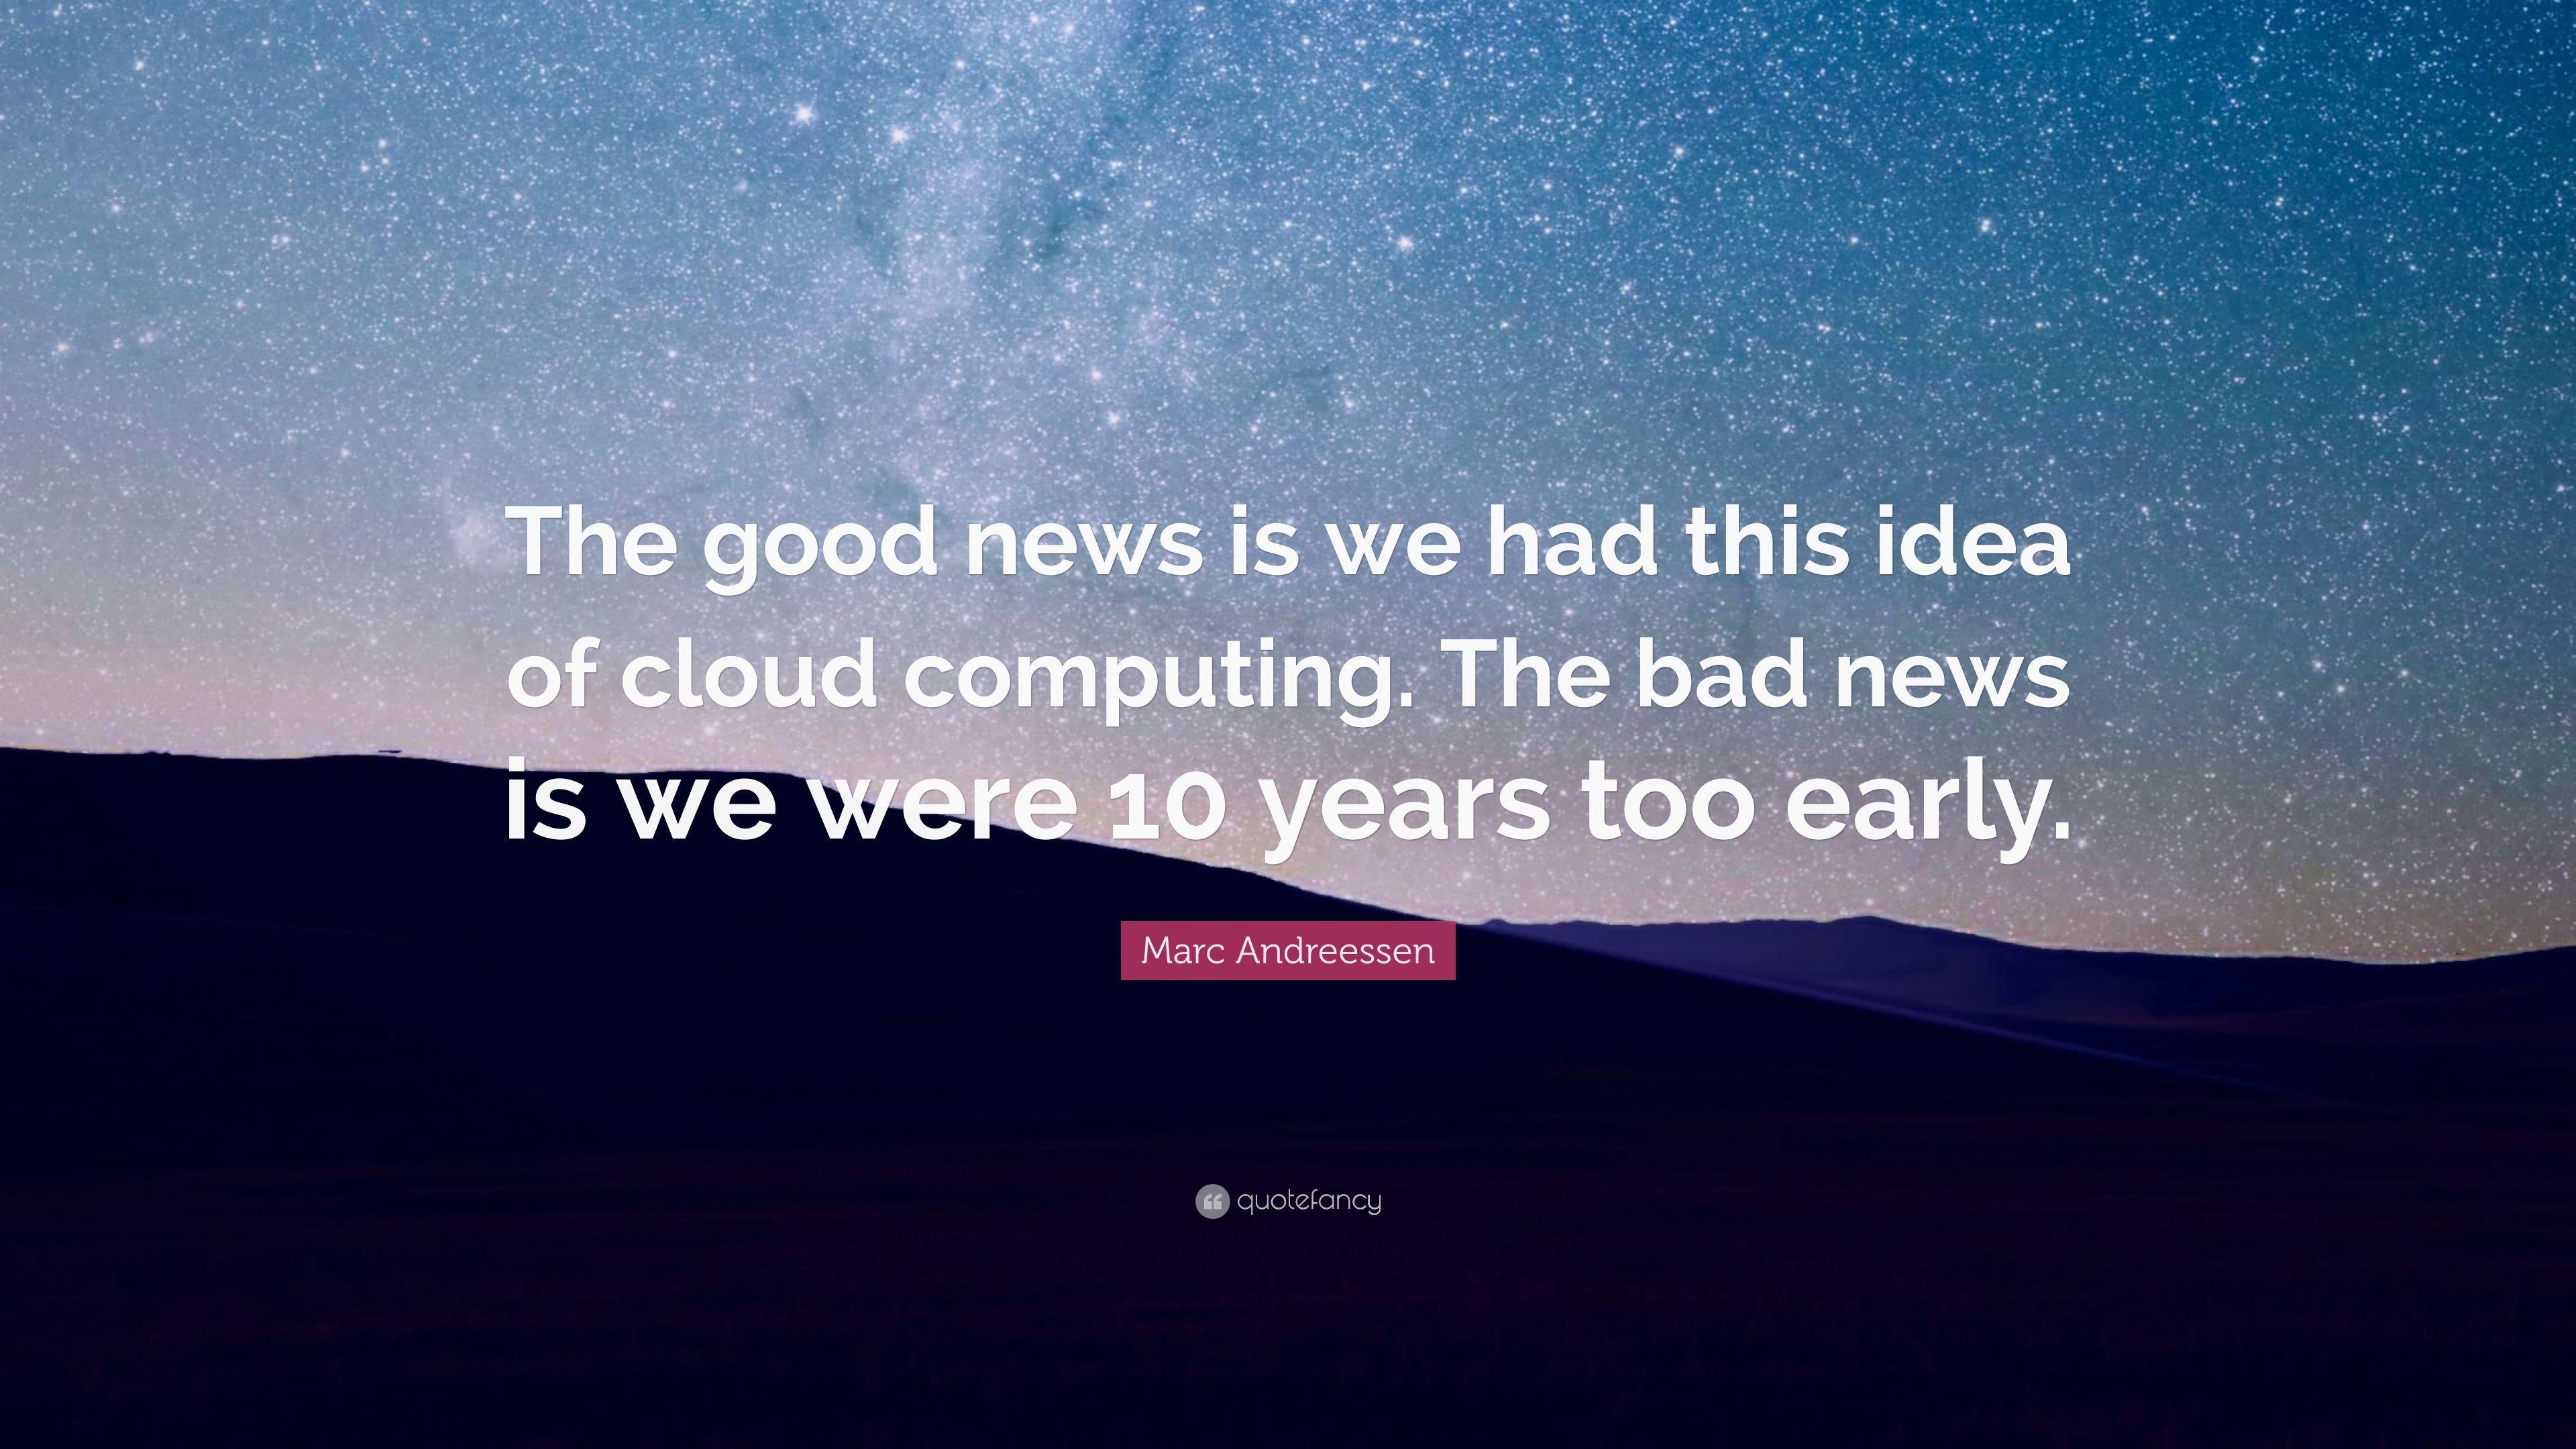 Marc Andreessen Quote: “The good news is we had this idea of cloud